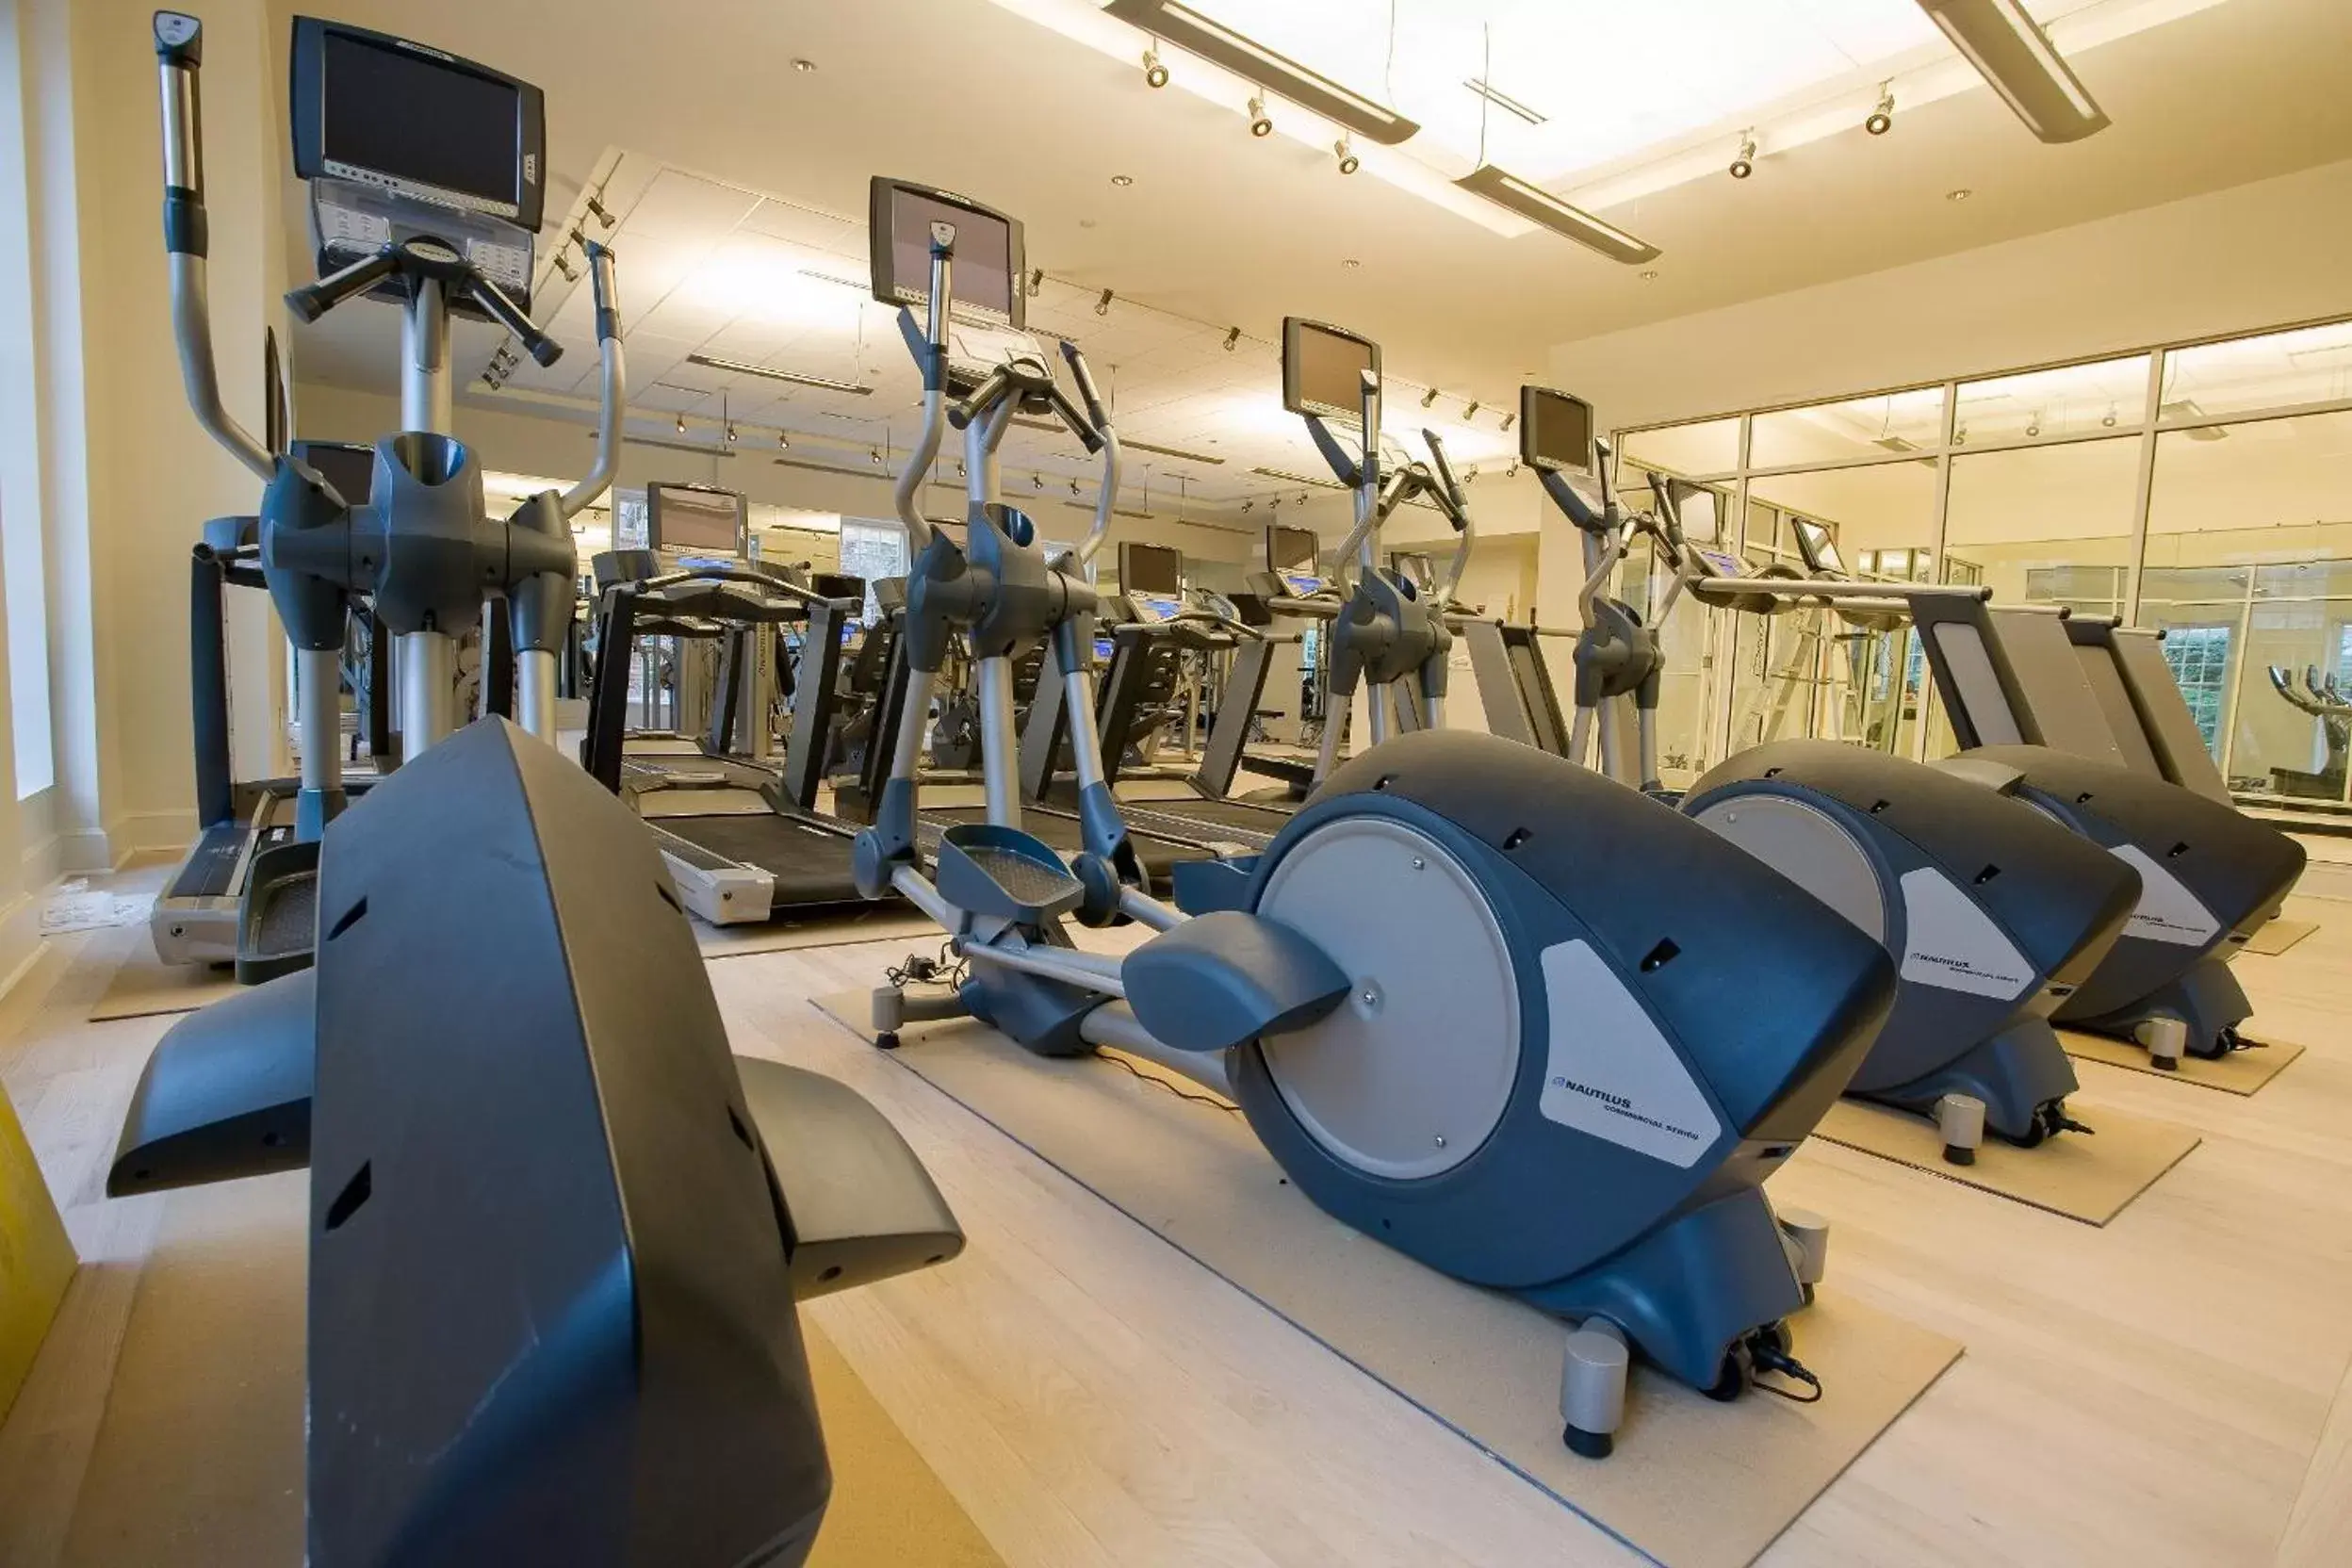 Fitness centre/facilities, Fitness Center/Facilities in Colonial Houses